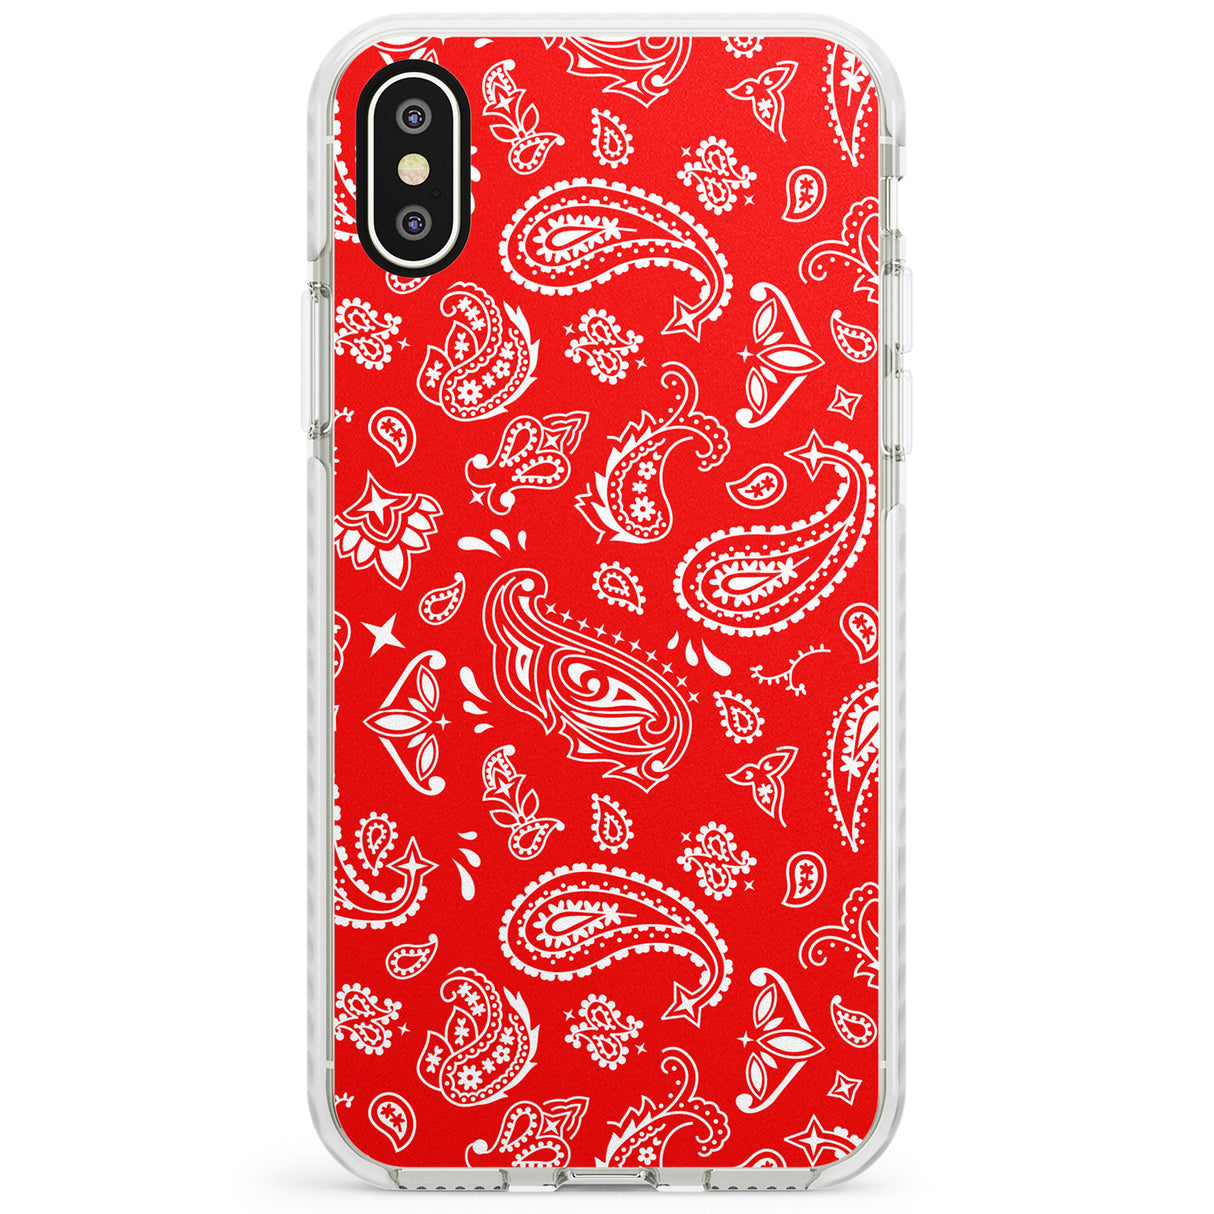 Red Bandana Impact Phone Case for iPhone X XS Max XR